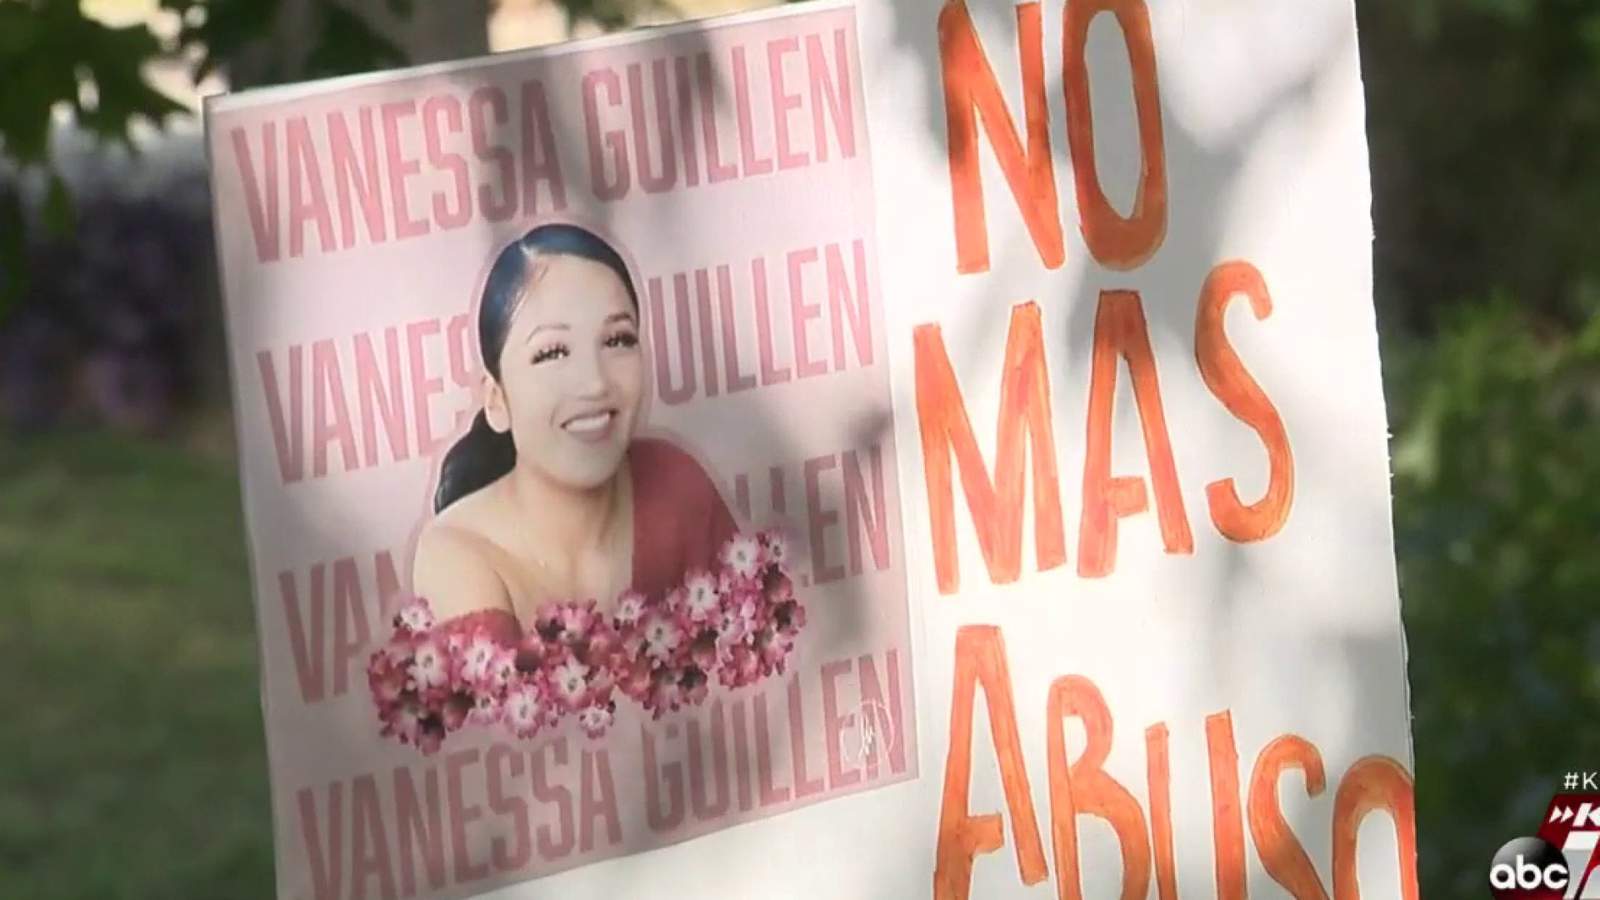 Group raises awareness about crimes against military women, men in honor of Vanessa Guillen